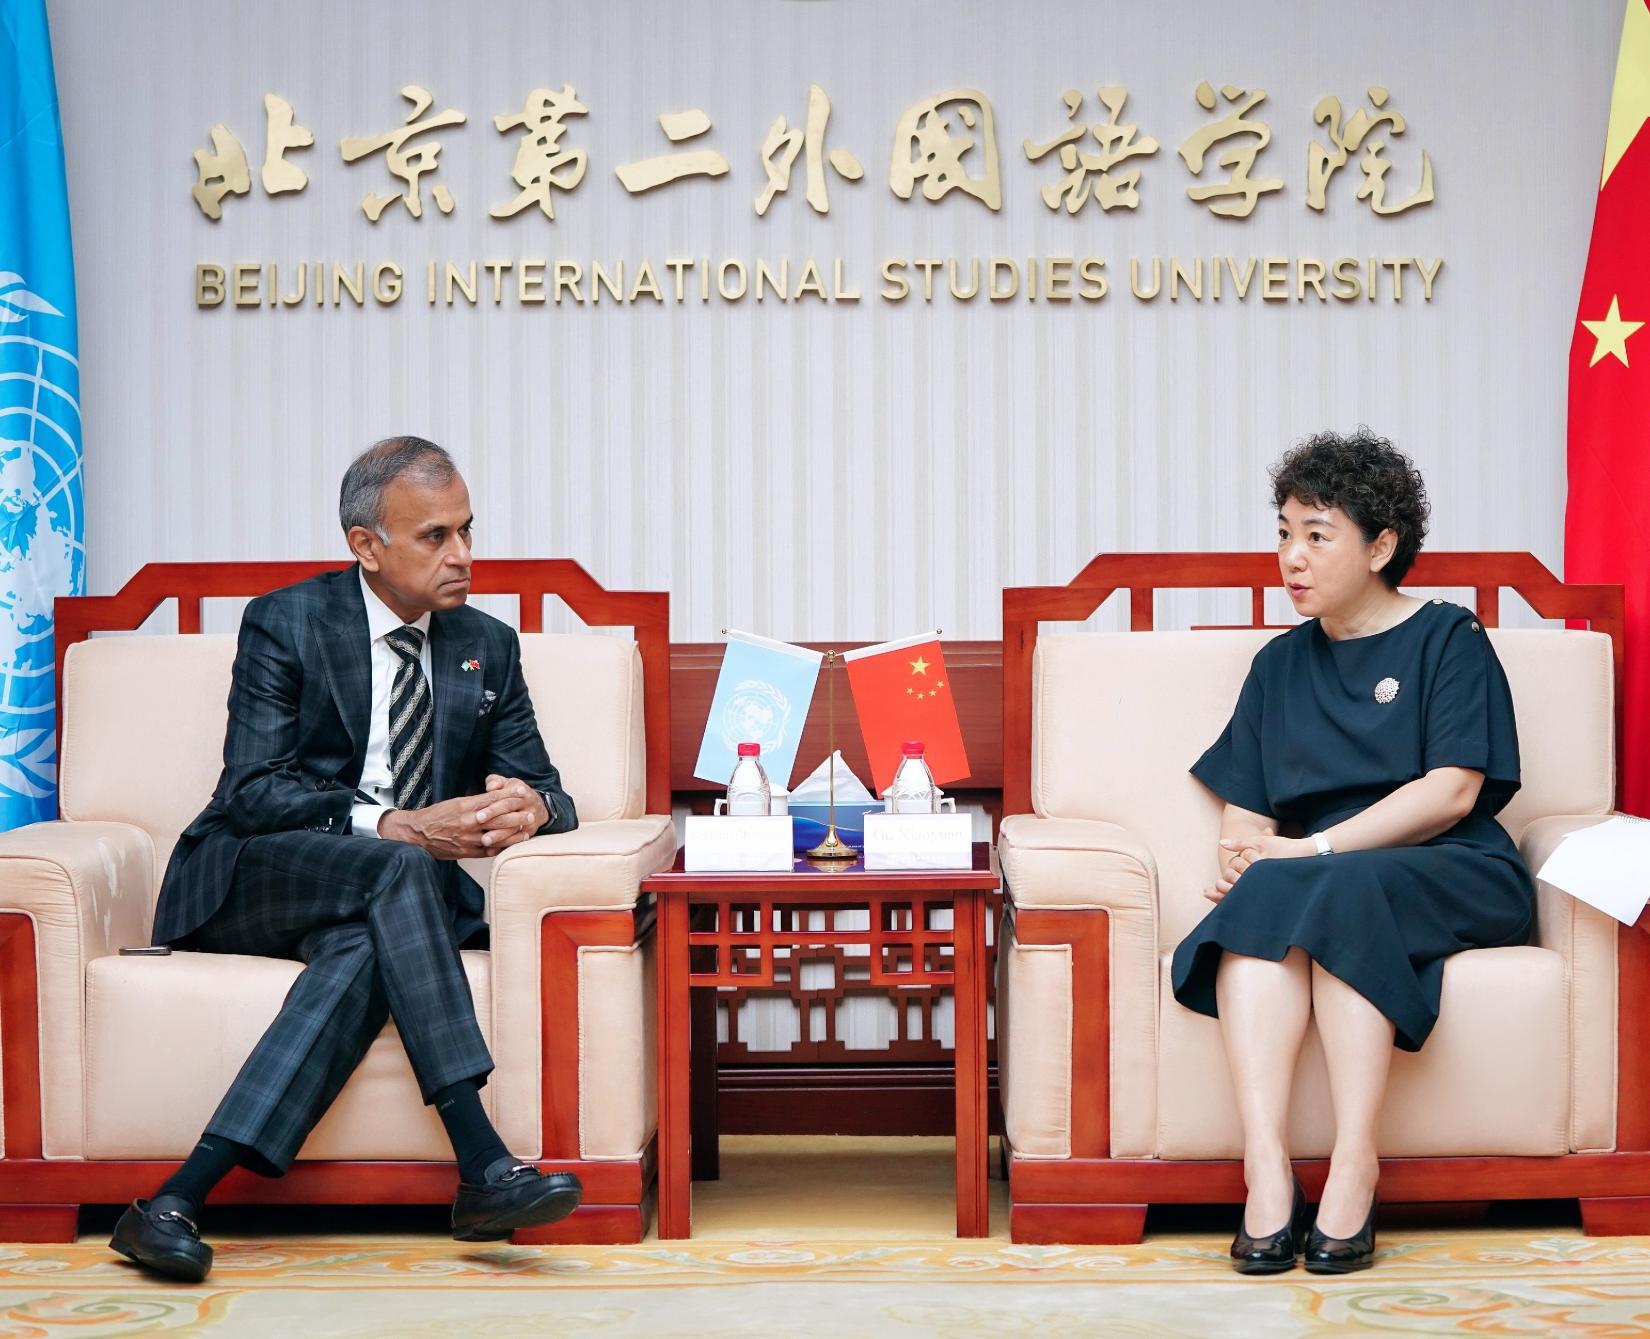 Siddharth Chatterjee, UN Resident Coordinator in China (left) with Gu Xiaoyuan, Chairperson of Beijing International Studies University (BISU) Council (right)